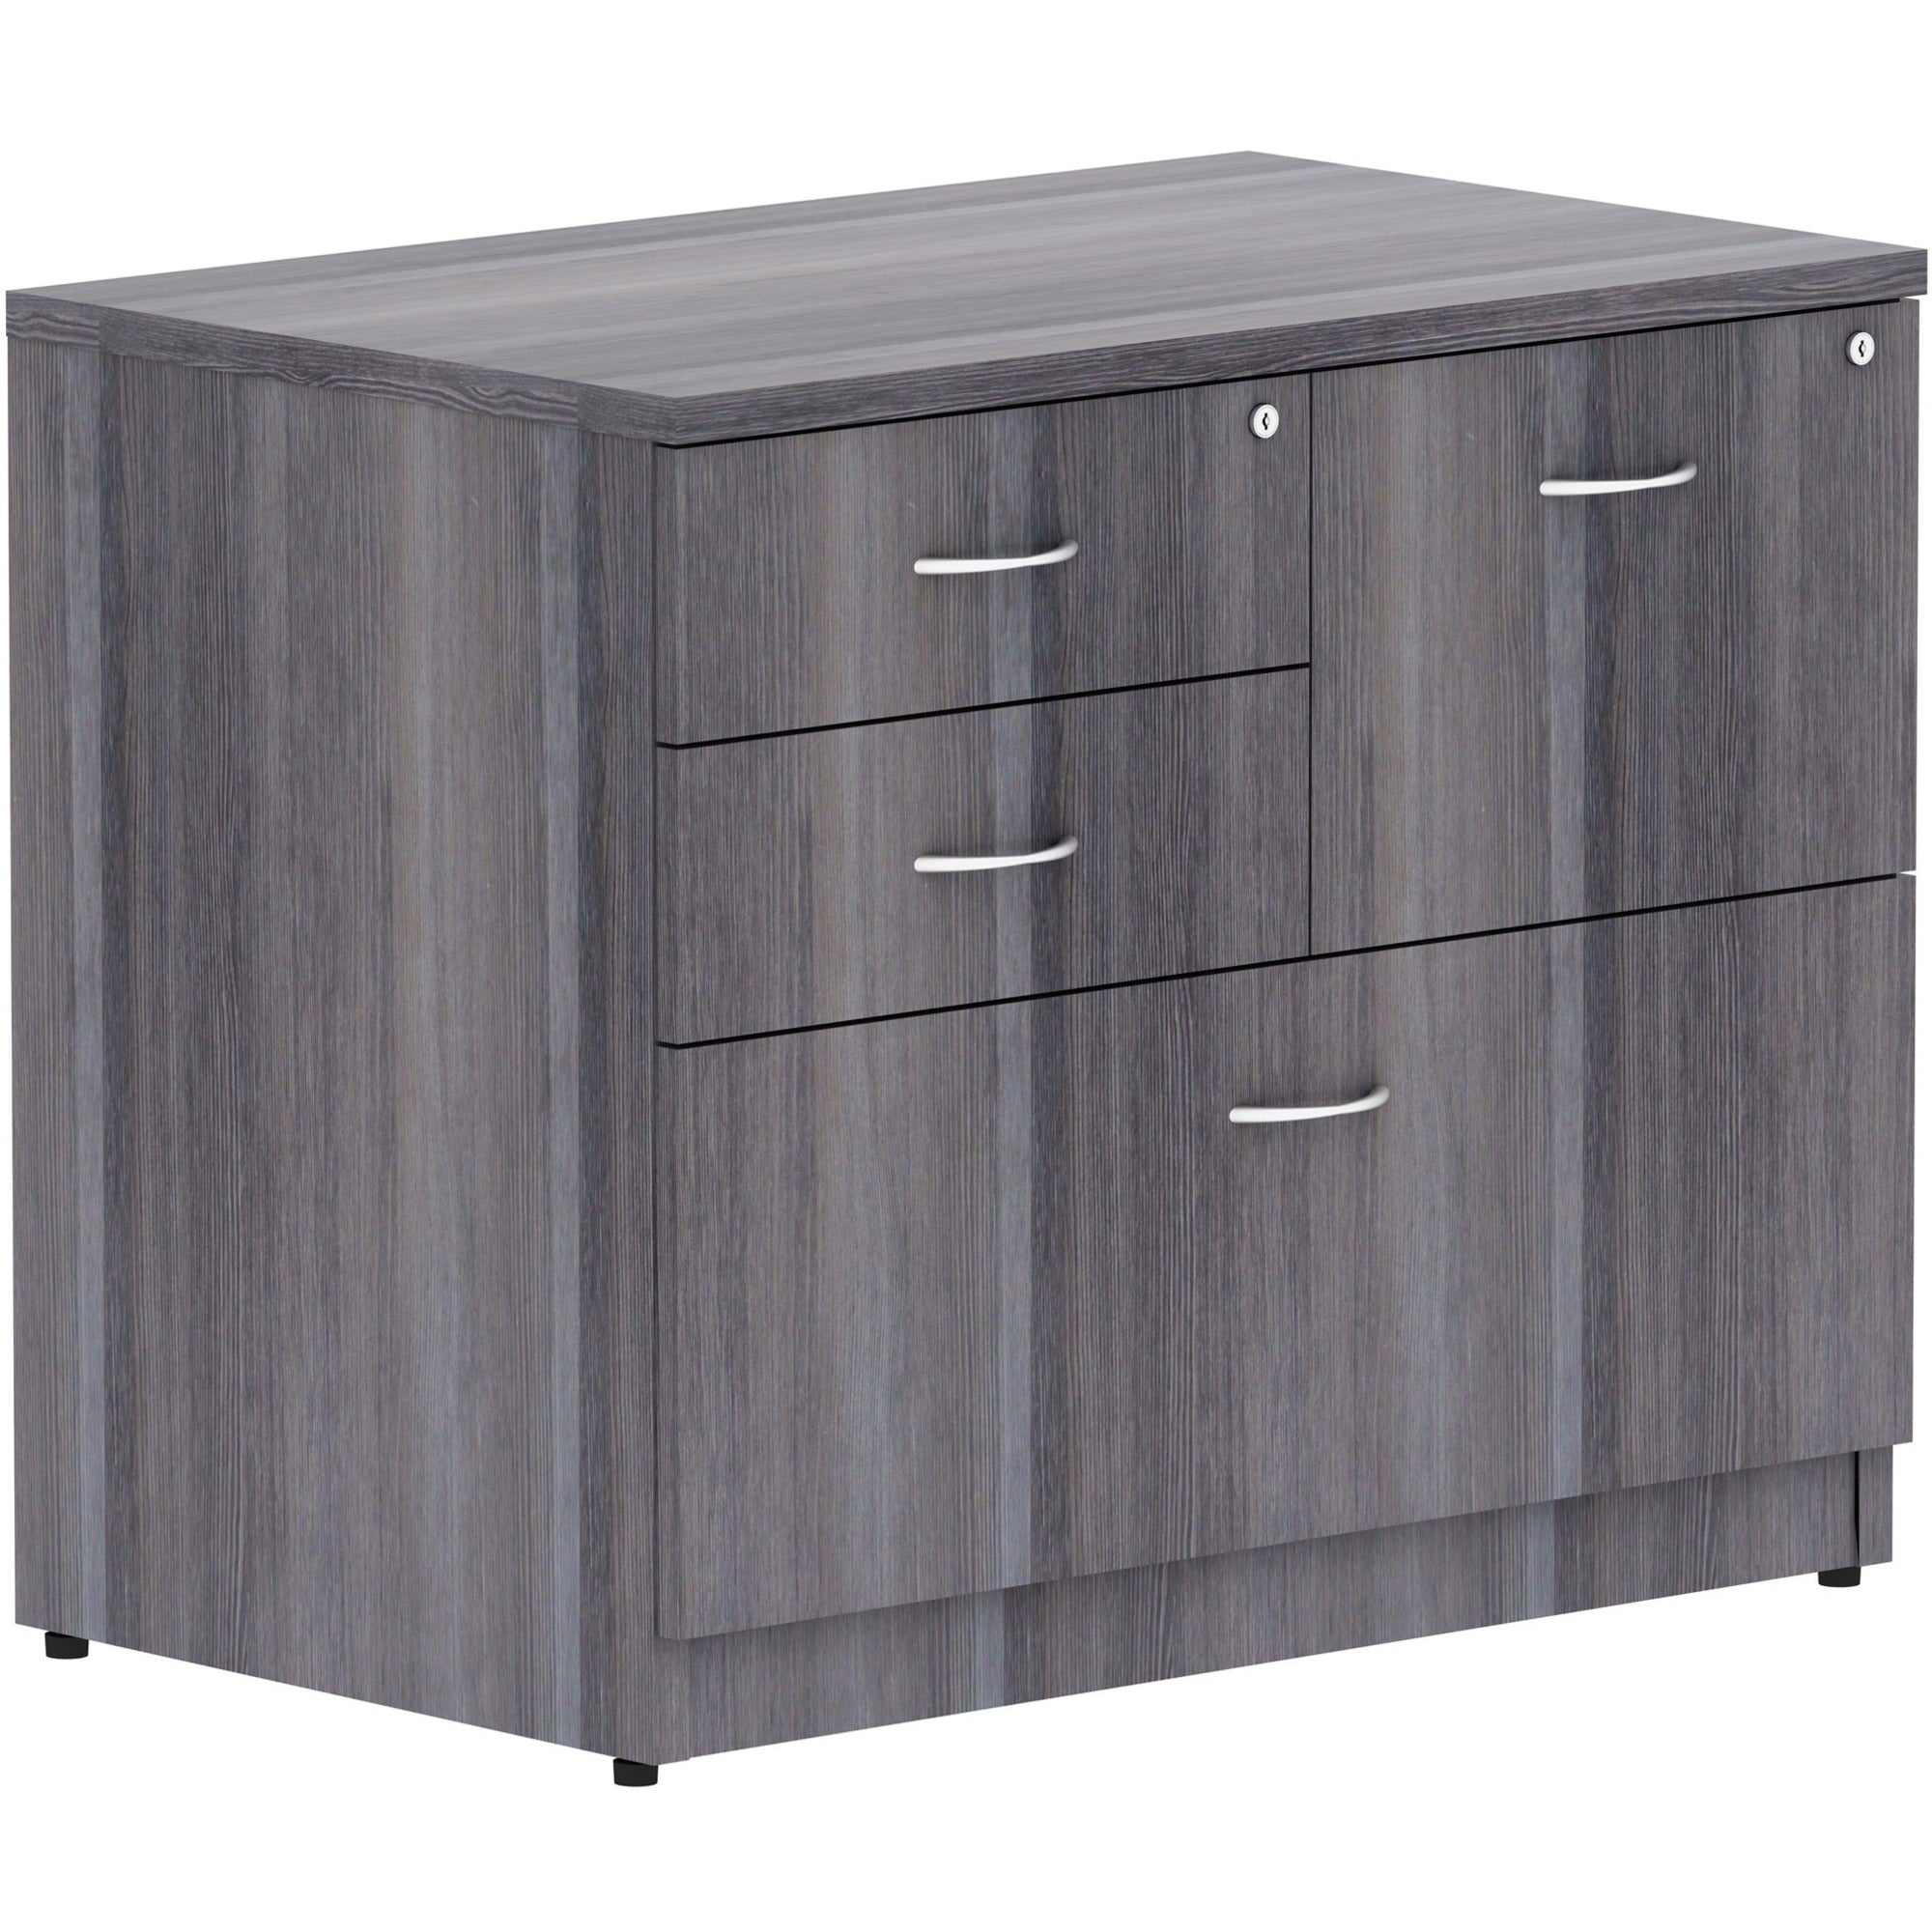 lorell-essentials-series-box-box-file-lateral-file-355-x-22295-lateral-file-1-top-4-x-file-box-drawers-finish-weathered-charcoal-laminate_llr69623 - 1